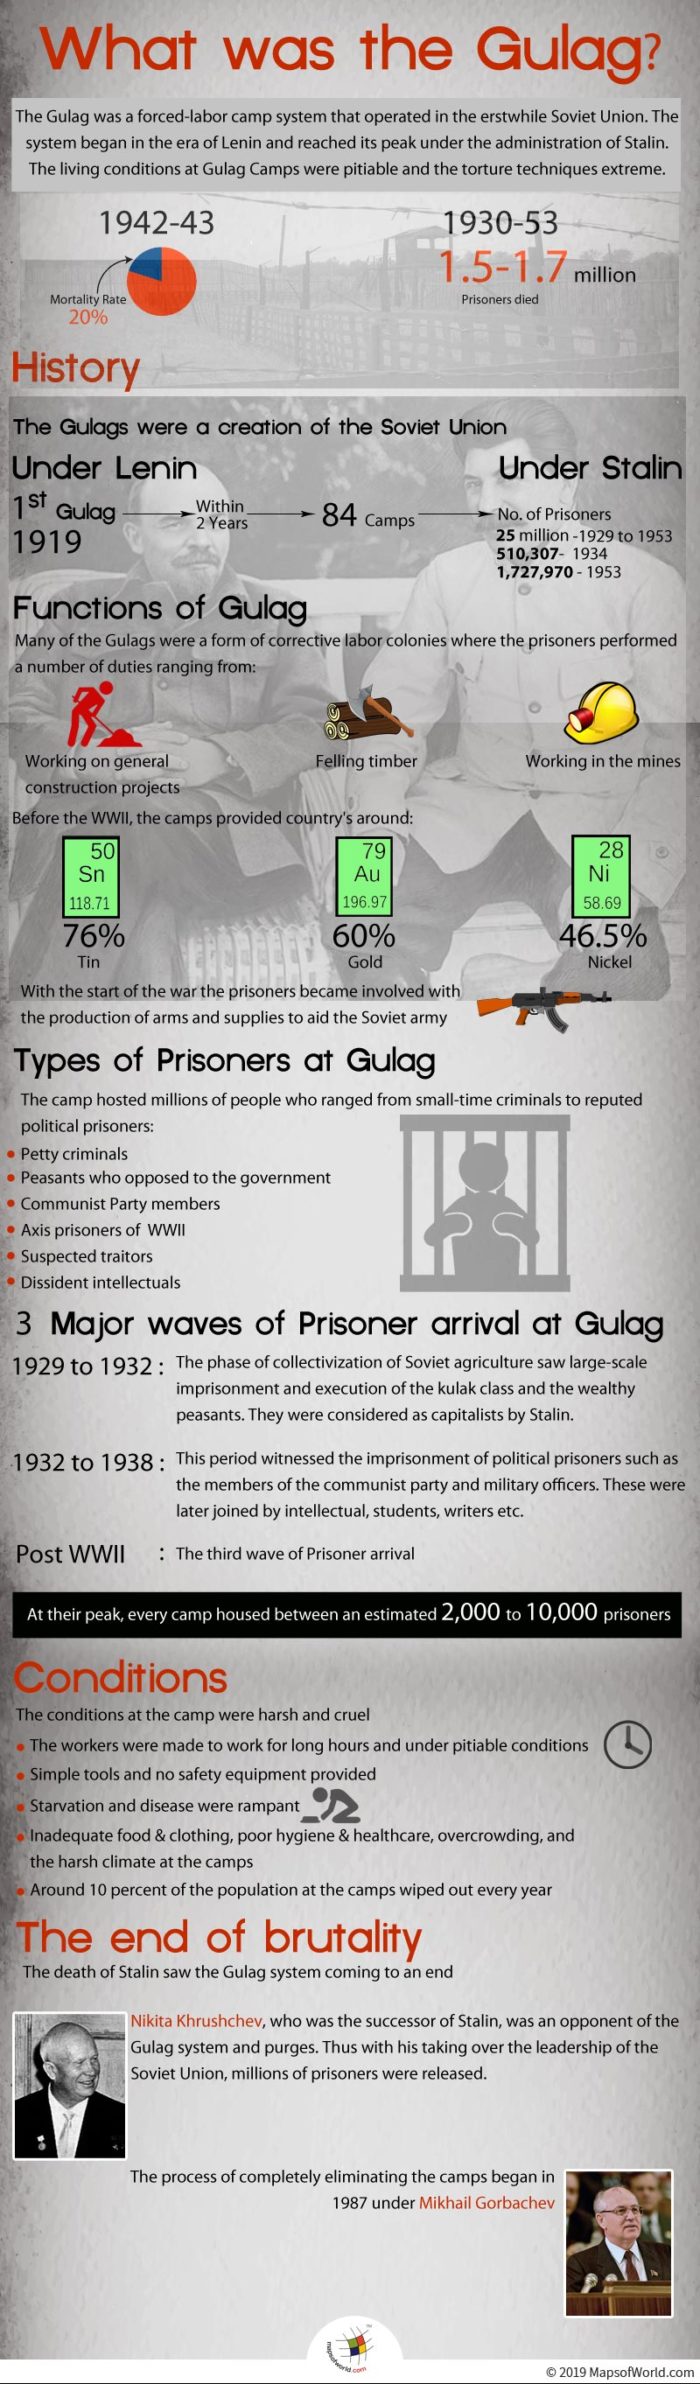 Infographic Showing Information About Gulag